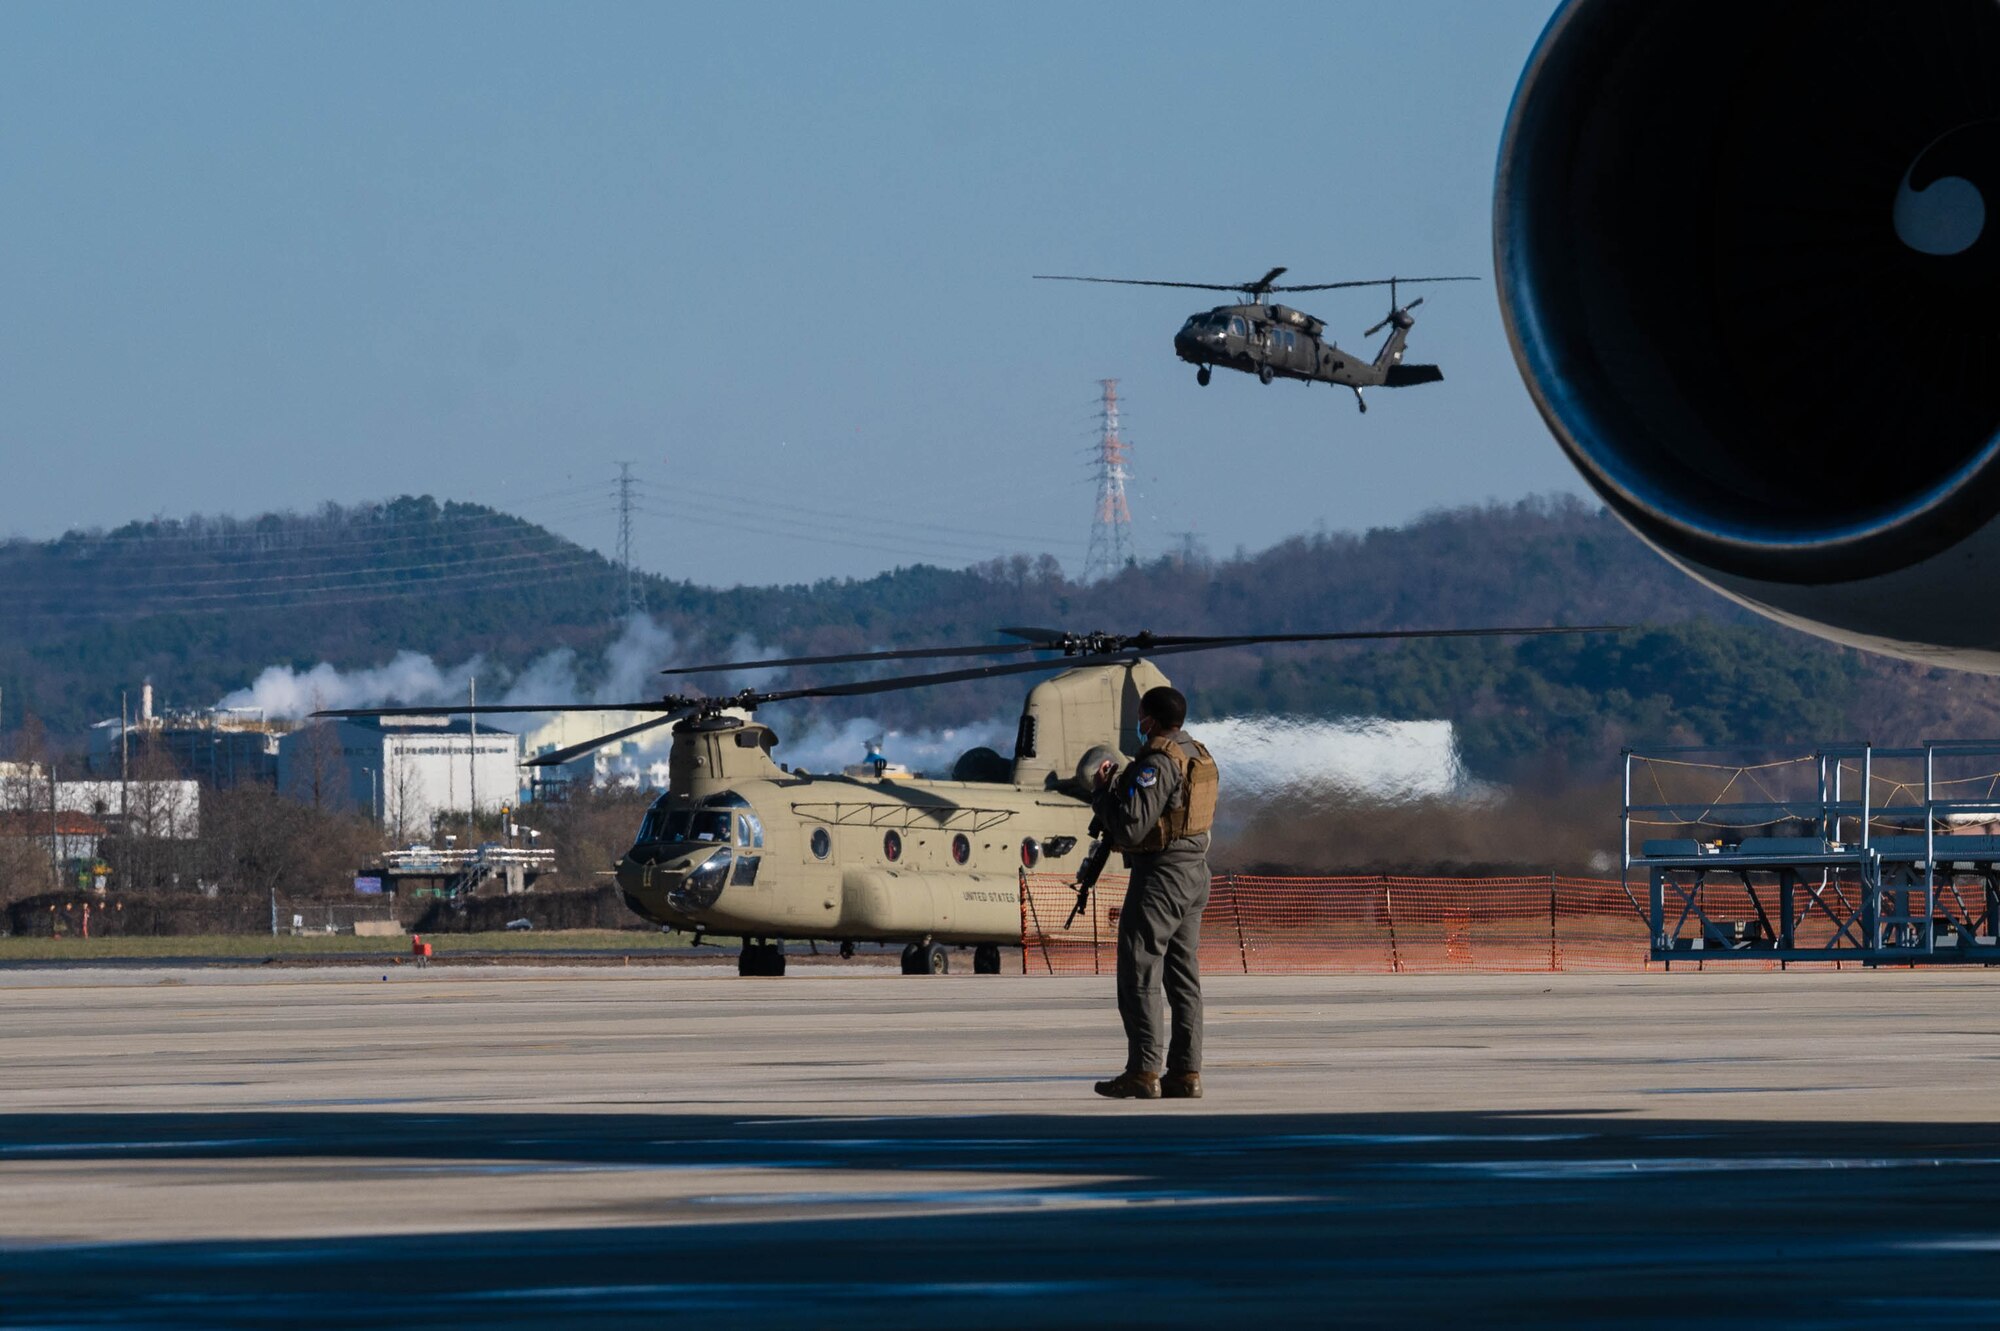 Lloyd J. Austin III, United States Secretary of Defense, arrives by HH-60 Black Hawk helicopter to board a departing aircraft at Osan